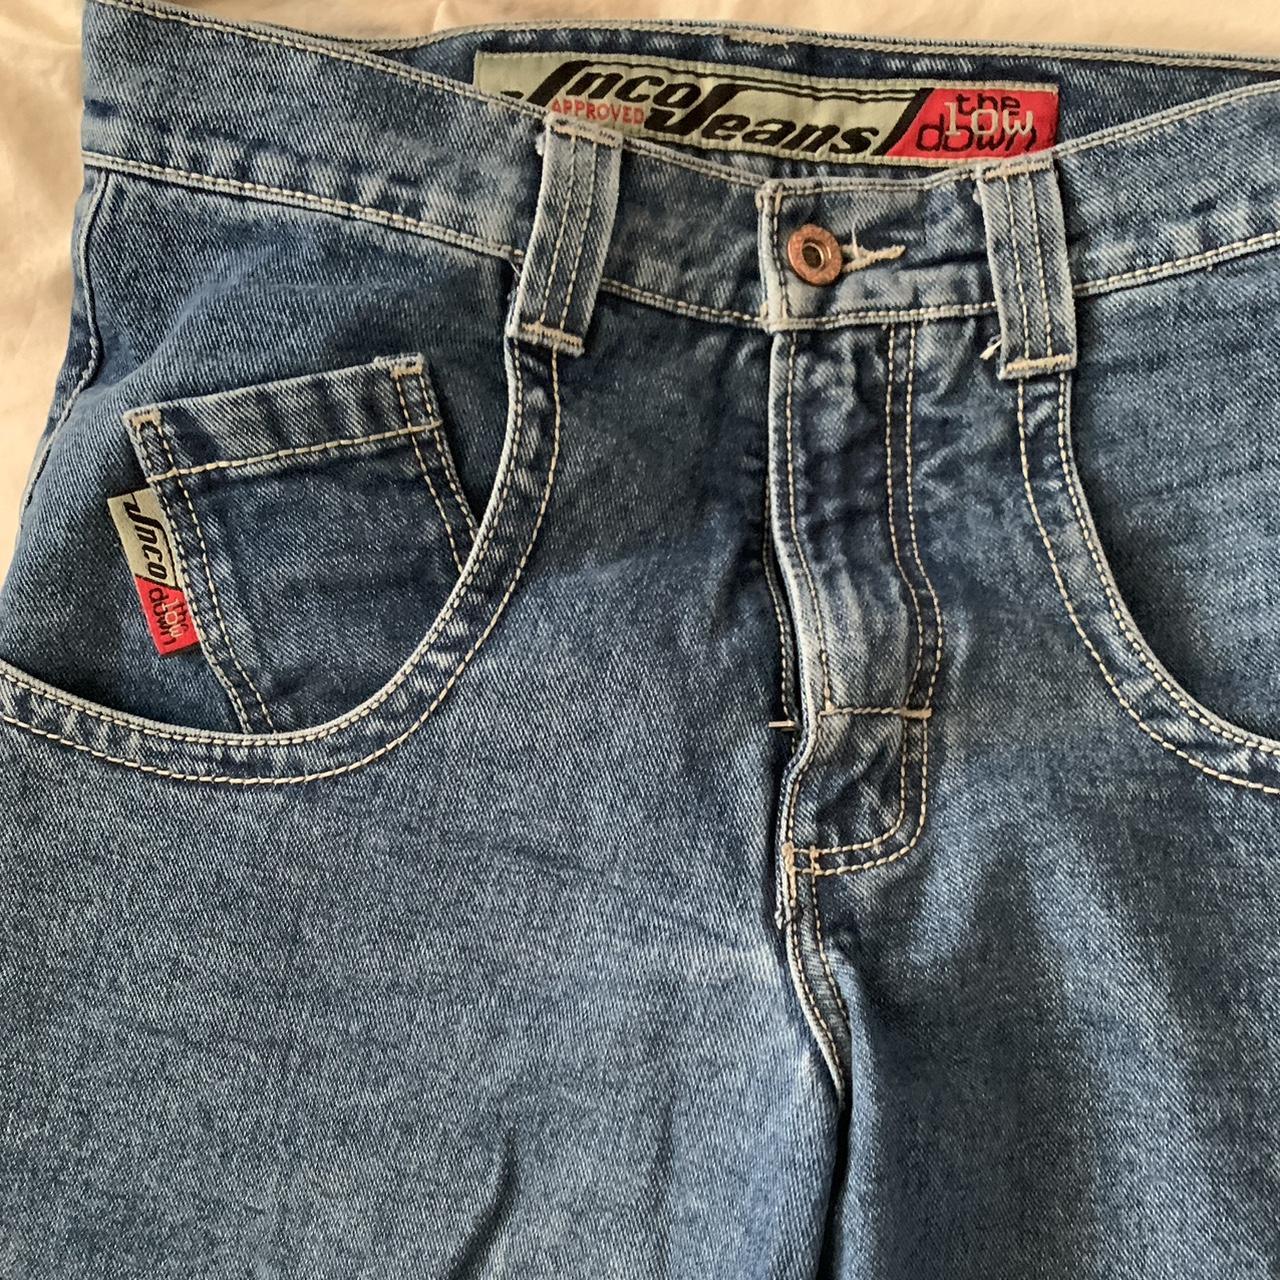 “Low down” jncos. Blue jeans with green embroidery.... - Depop